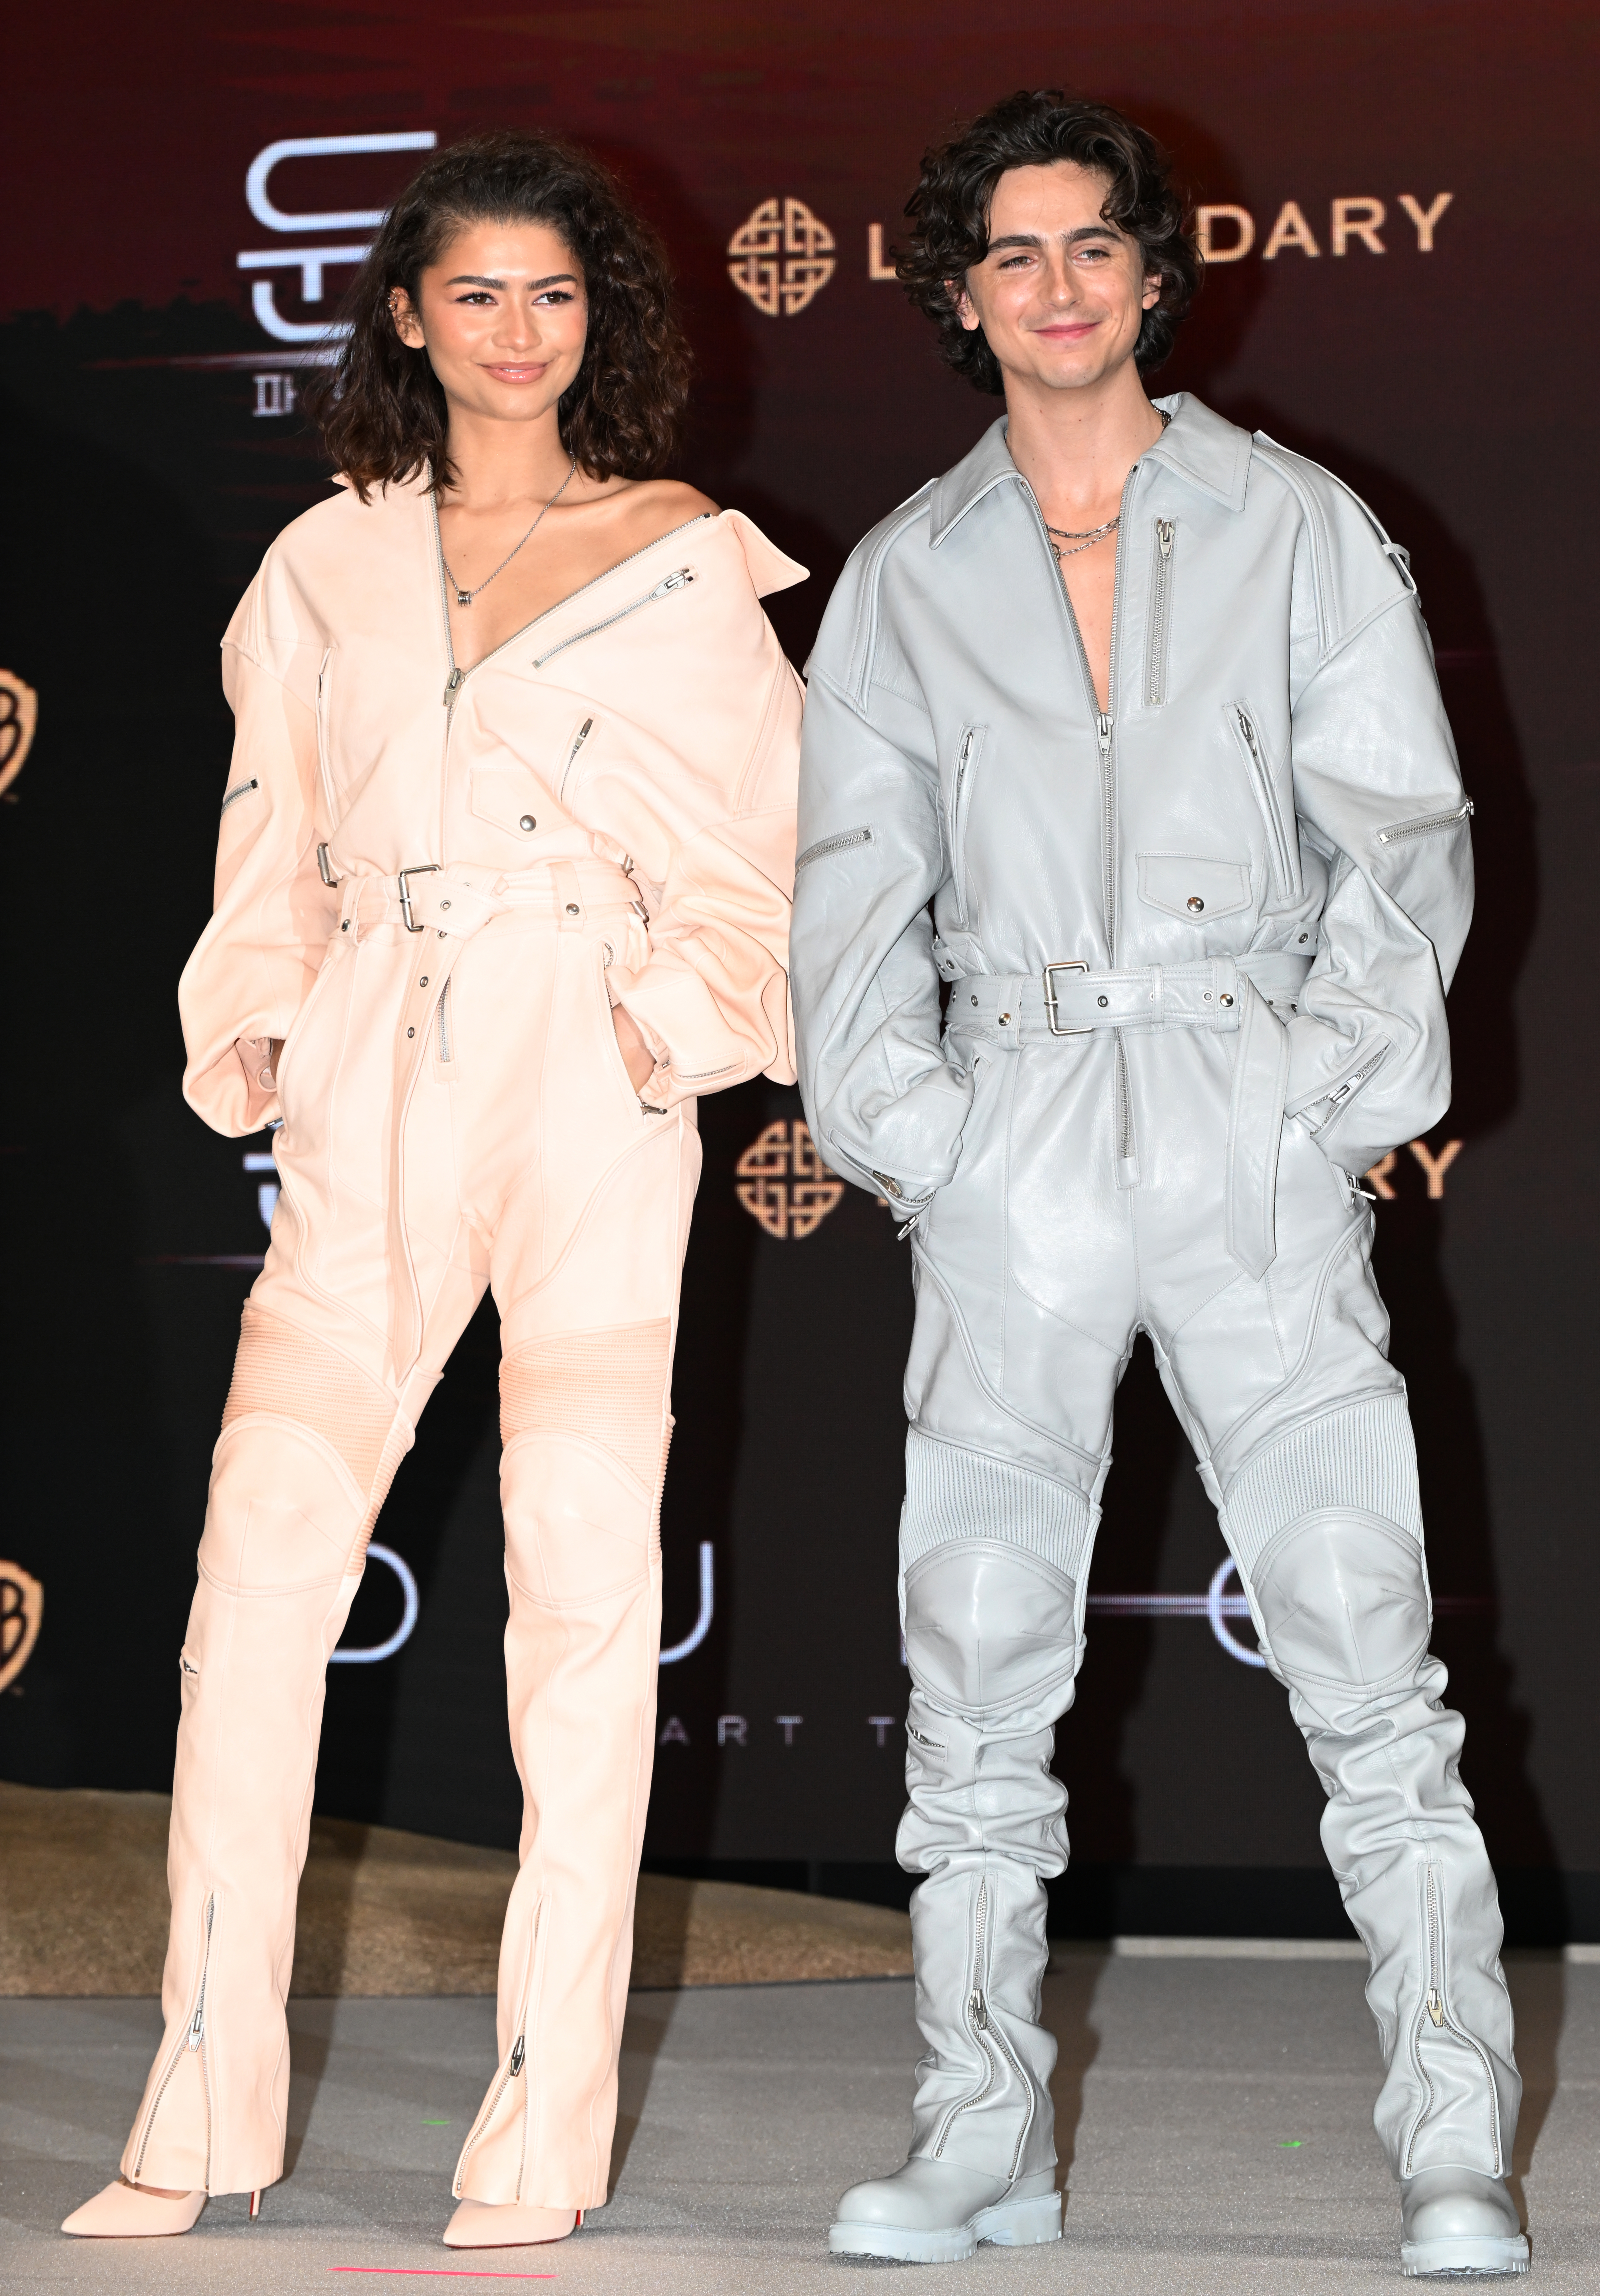 The costars posing in matching belted jumpsuits and tall boots at an event